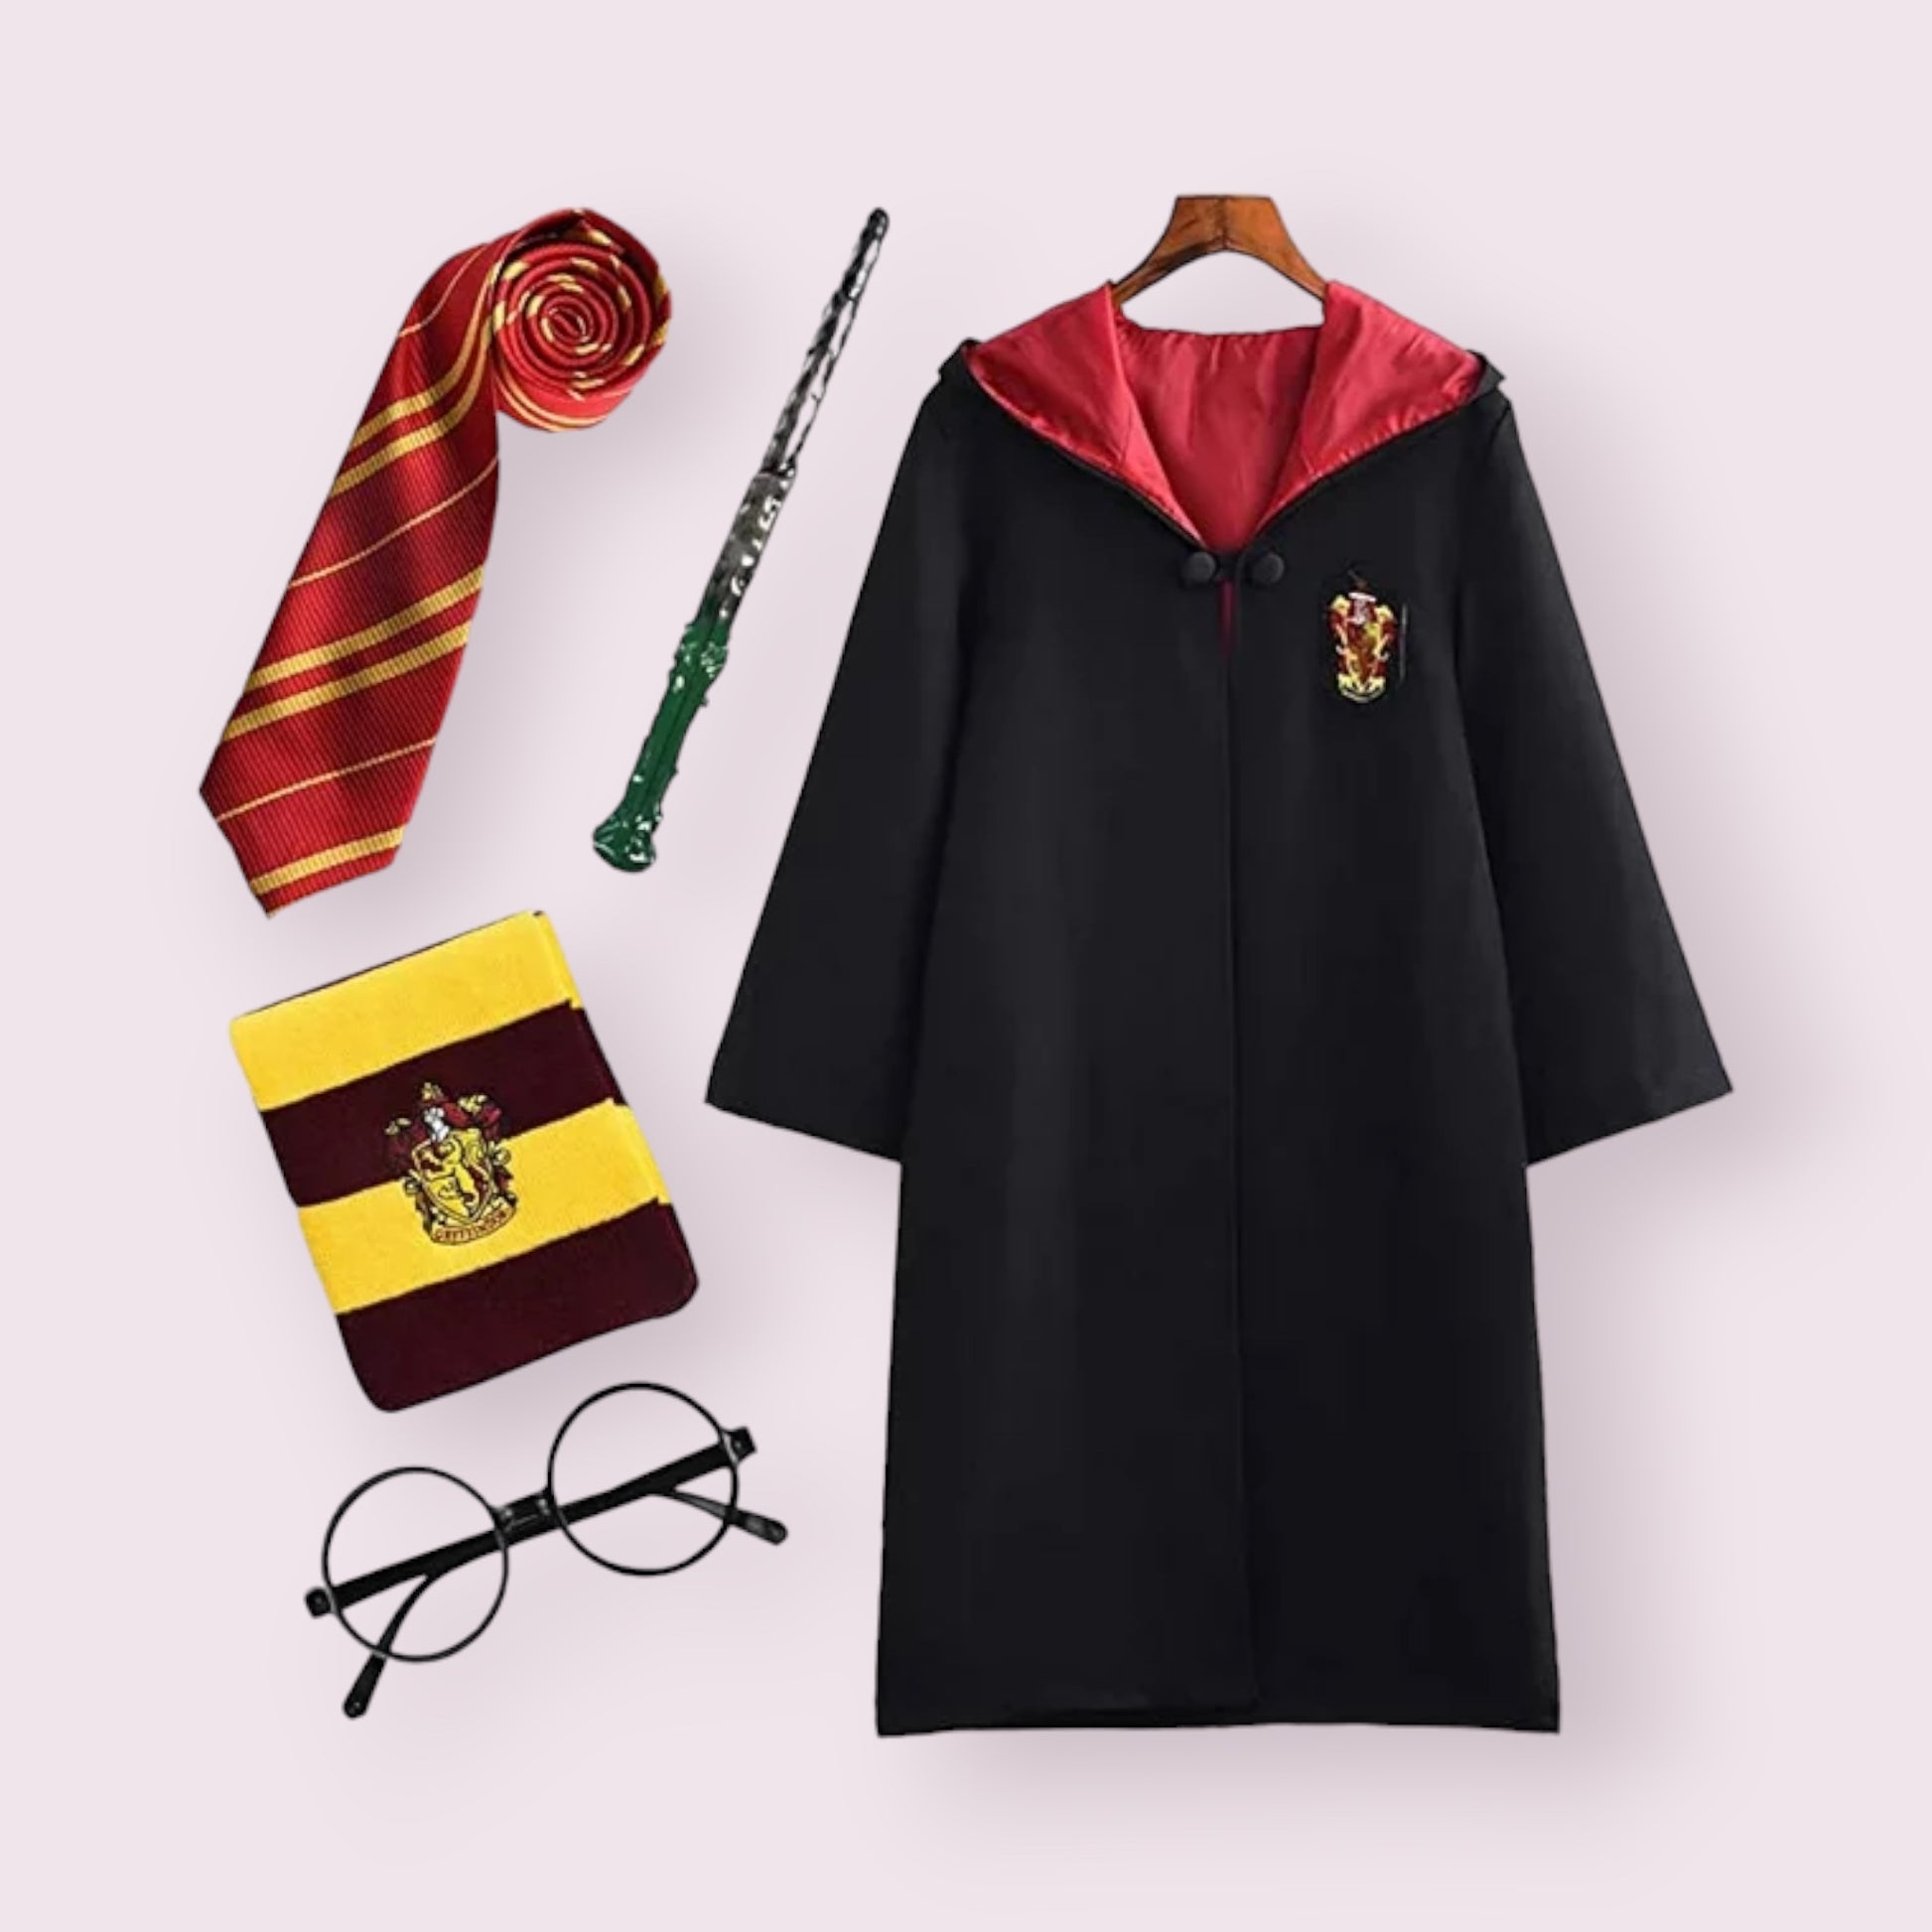 Harry Potter Outfit Full Set  Pixie Candy Shoppe   